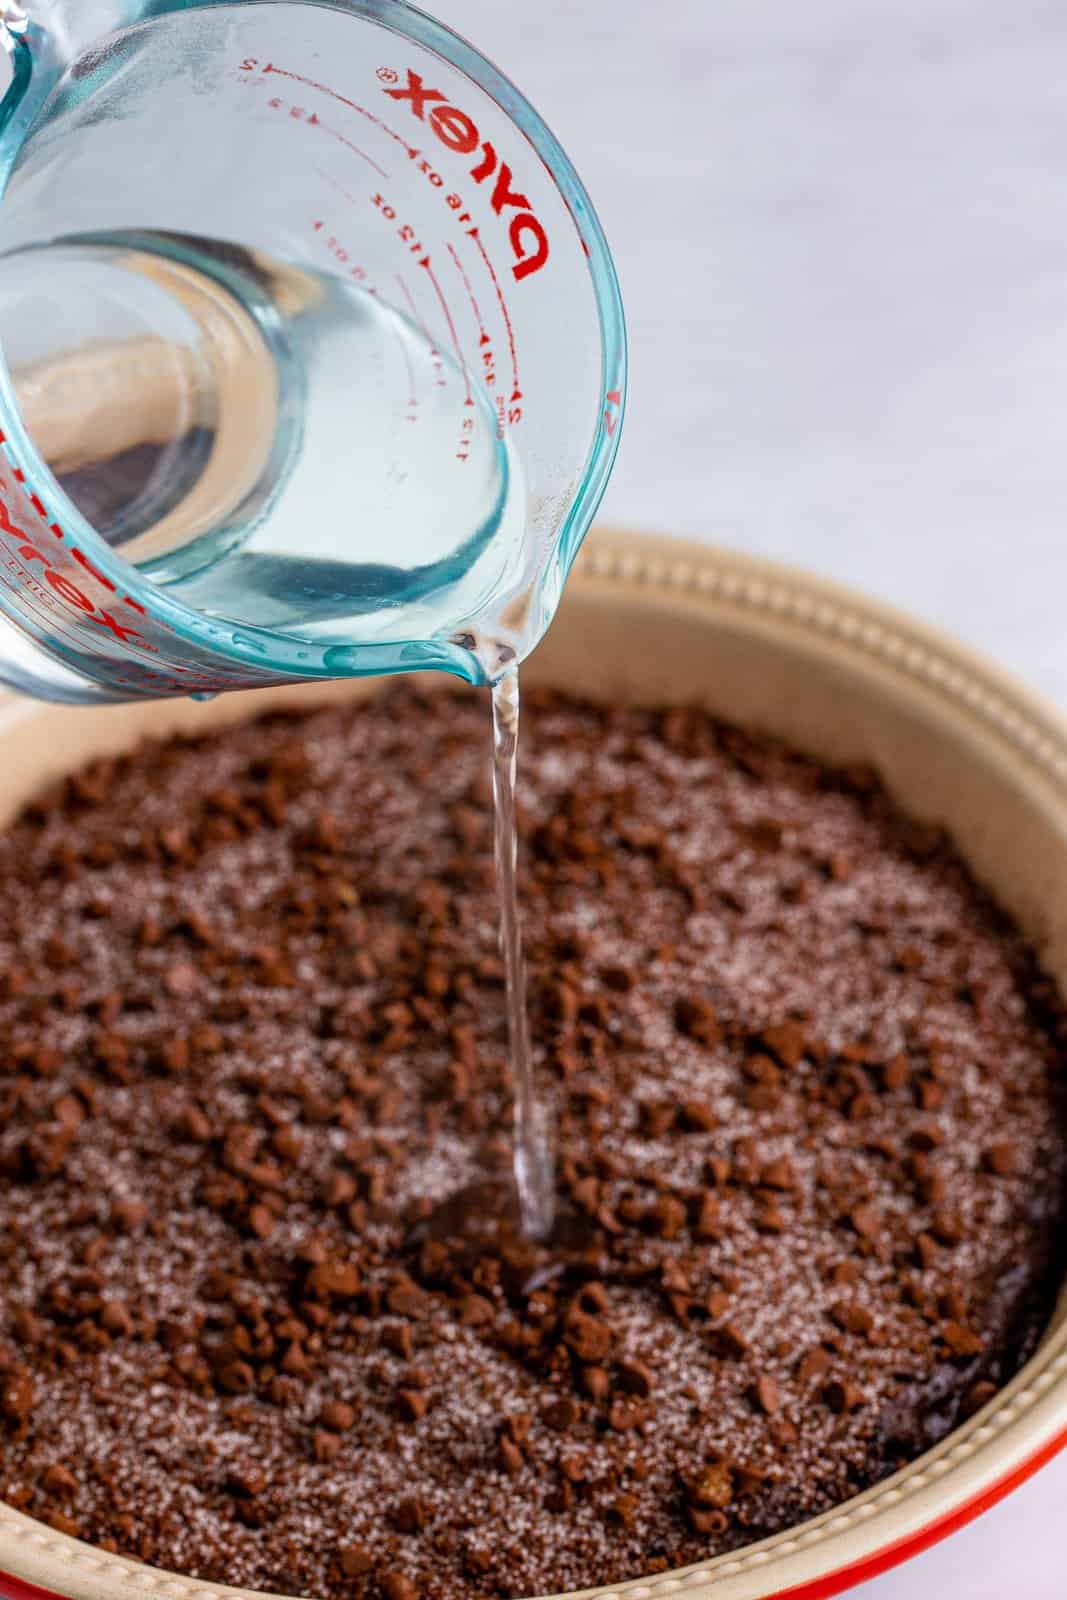 Water being poured over cake in baking dish.